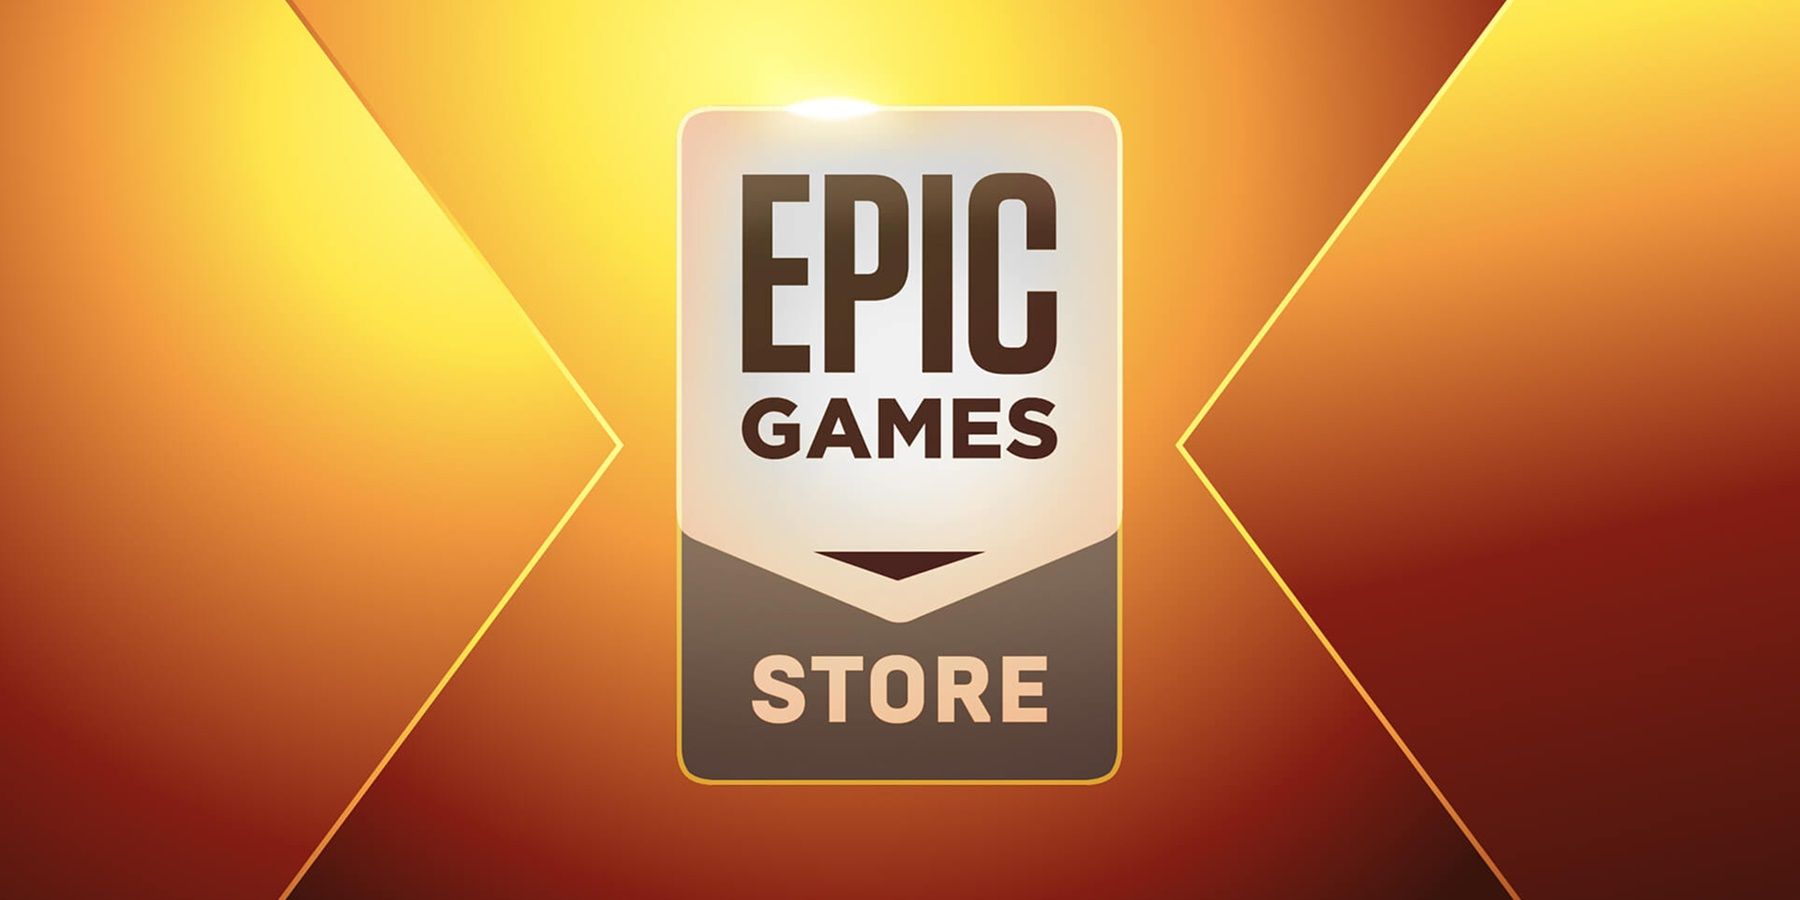 epic games store logo gold background